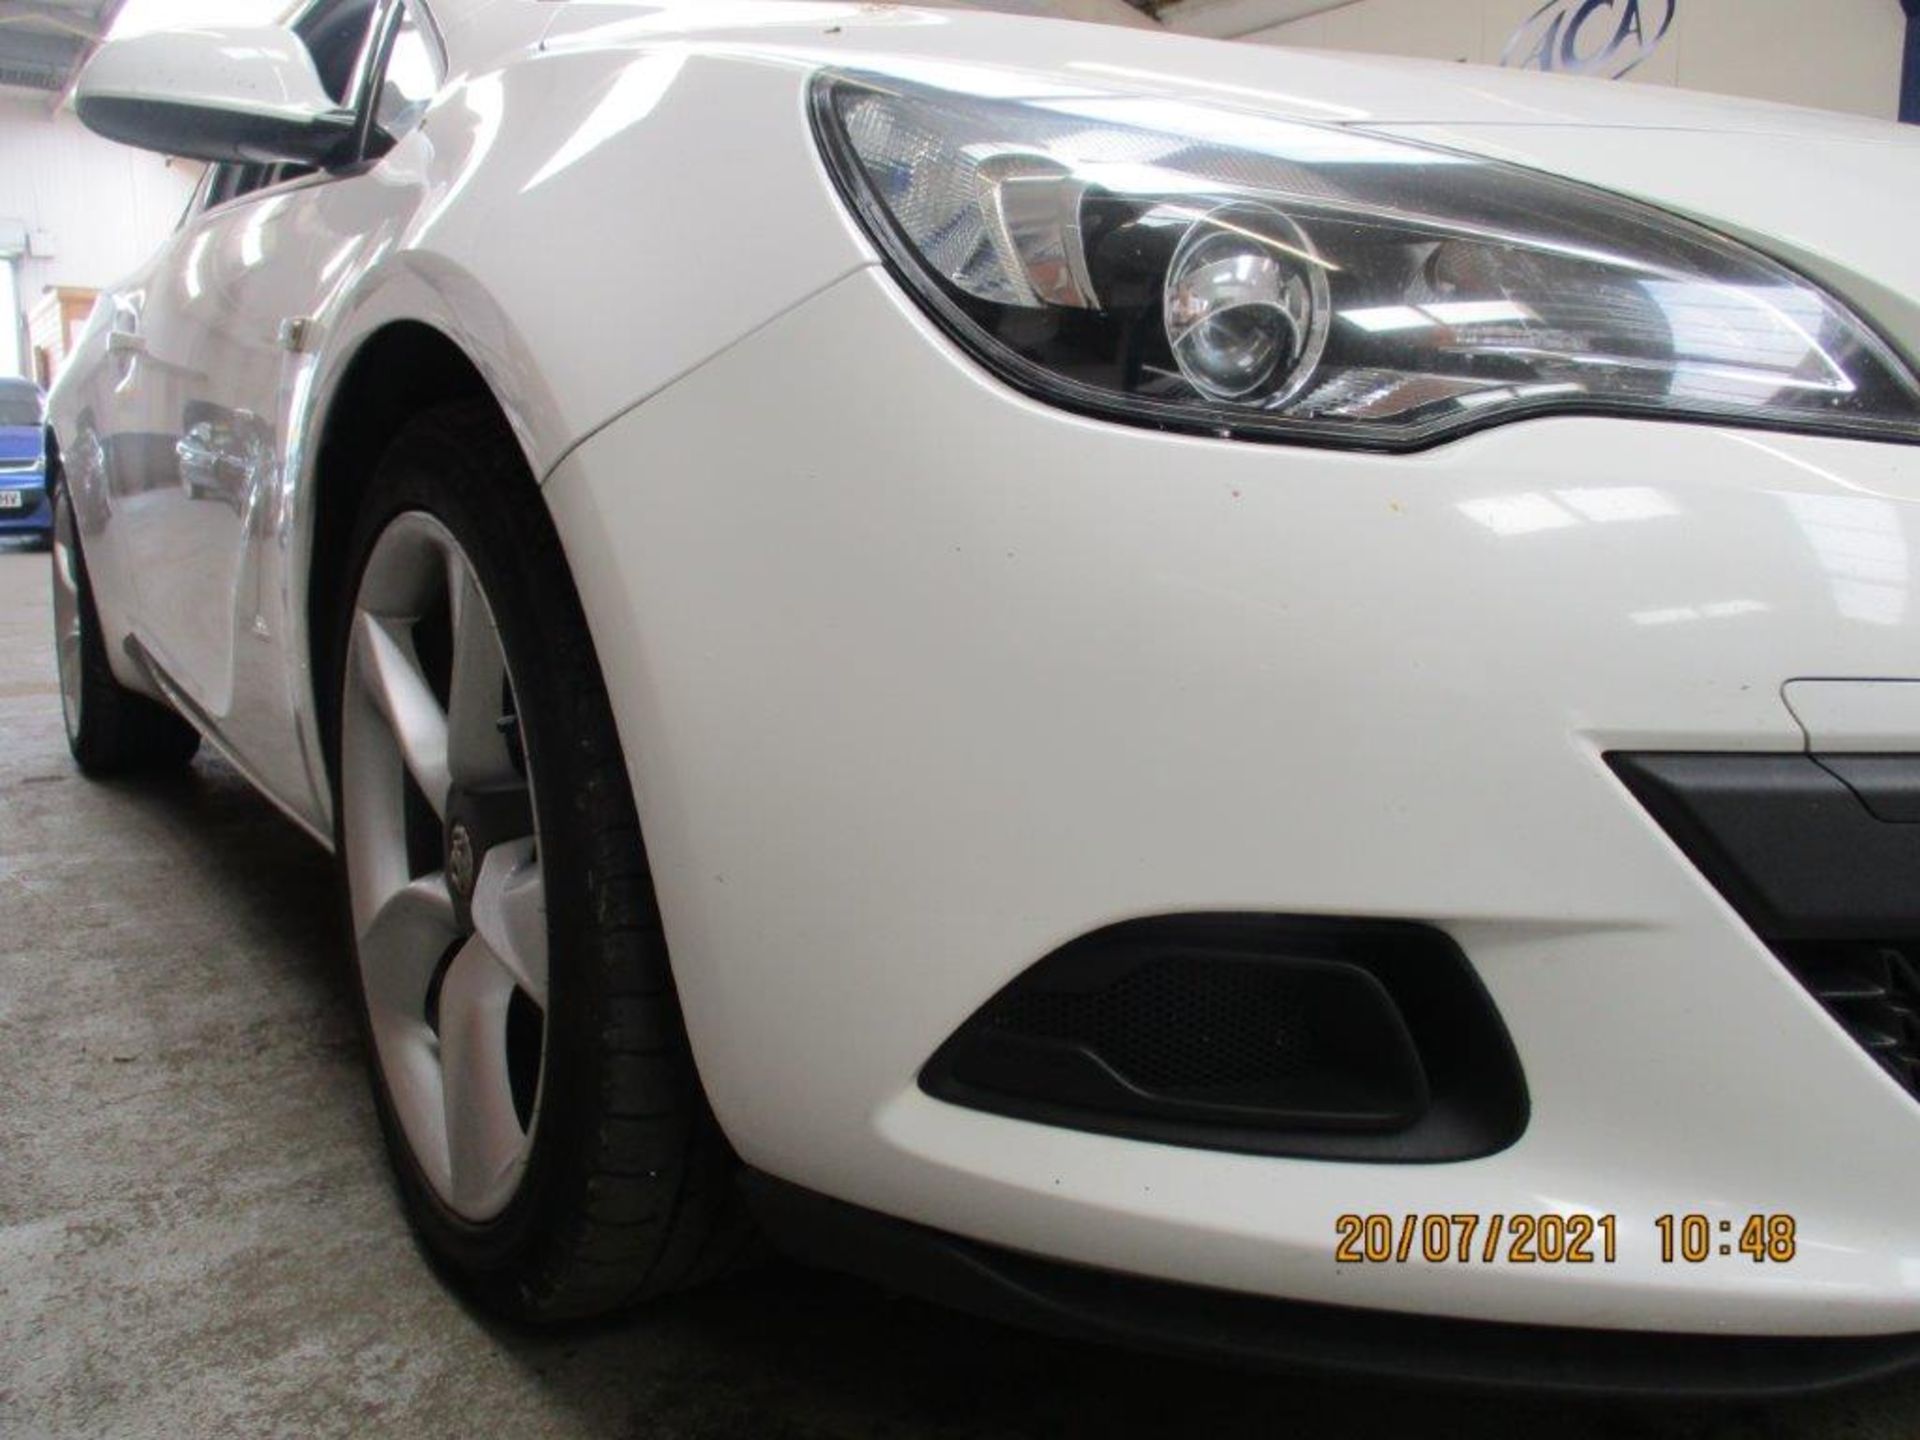 63 13 Vauxhall Astra GTC Sport - Image 9 of 20